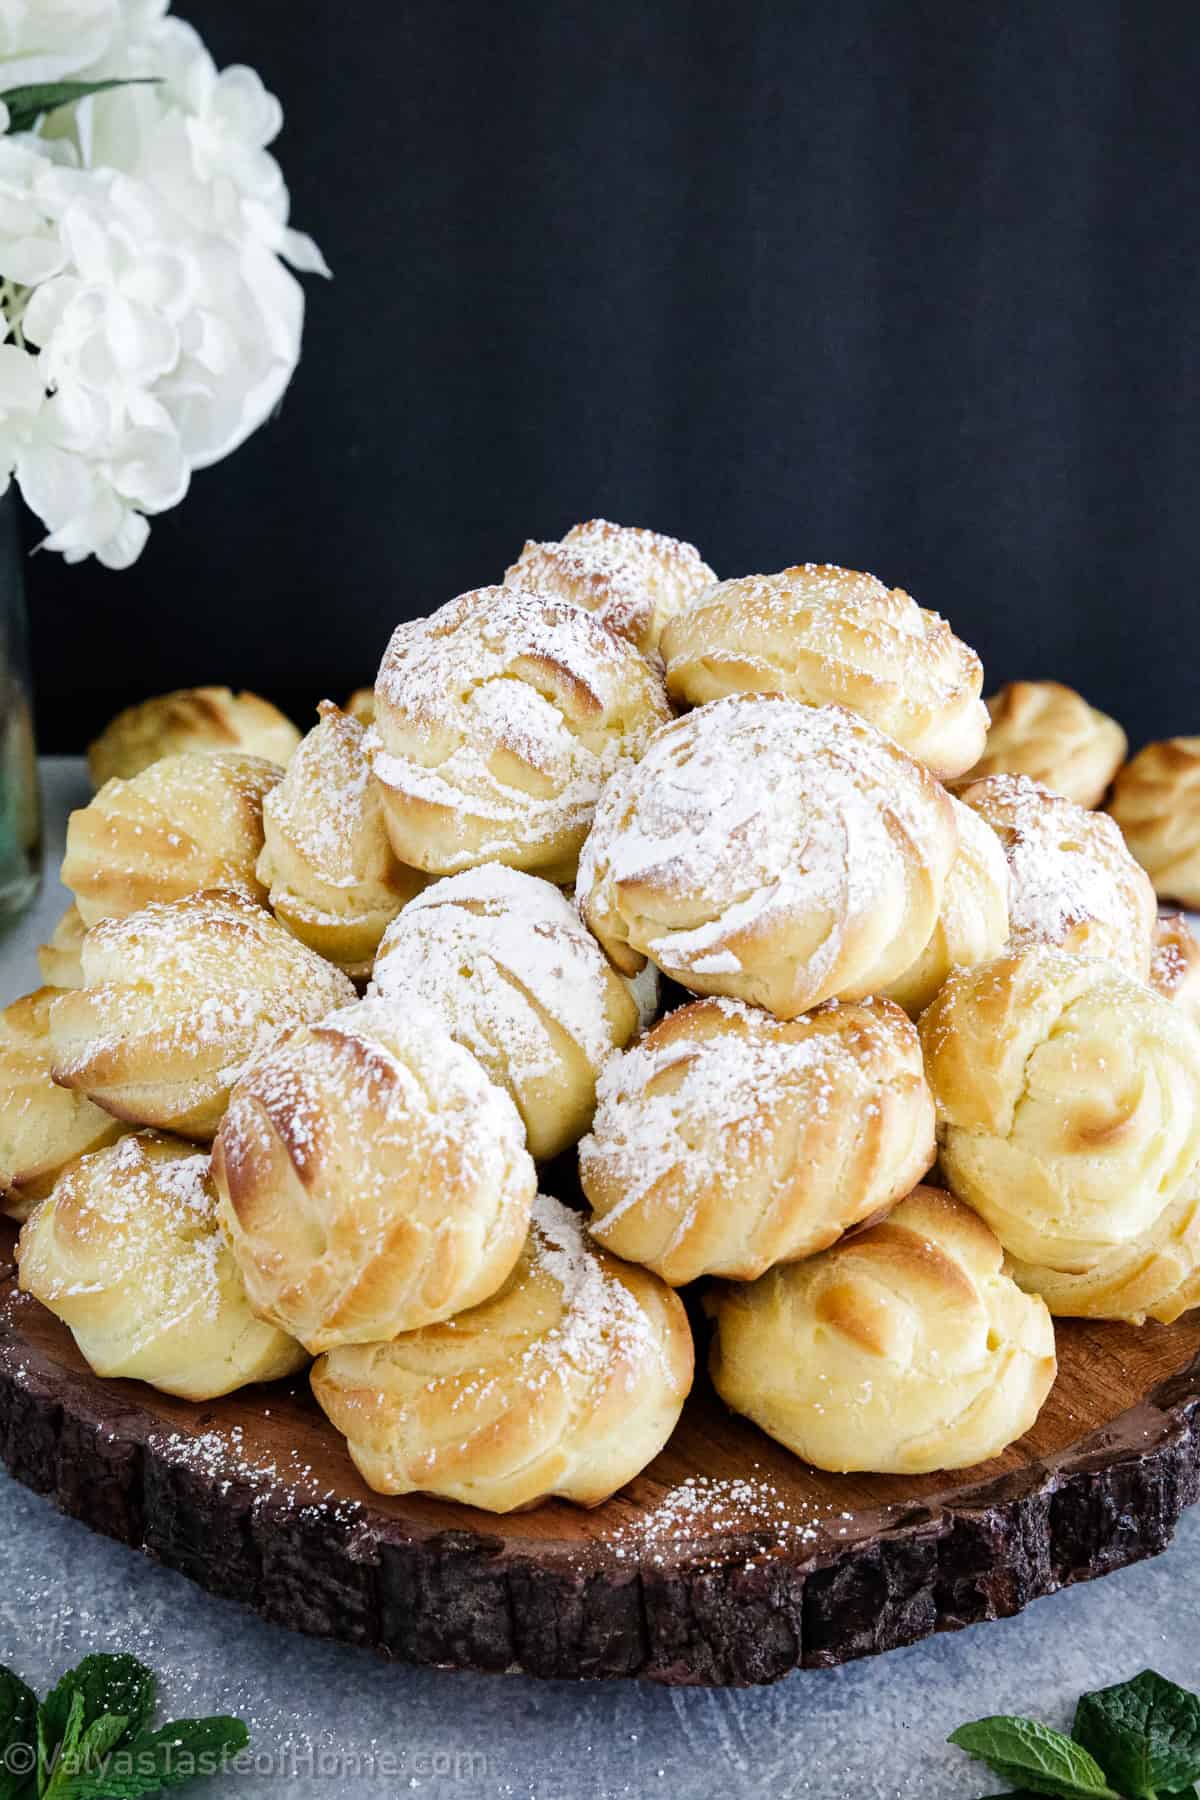 Cream Puffs are a classic French dessert that are filled with a creamy, sweet filling and sprinkled with powdered sugar for a delicious treat! 